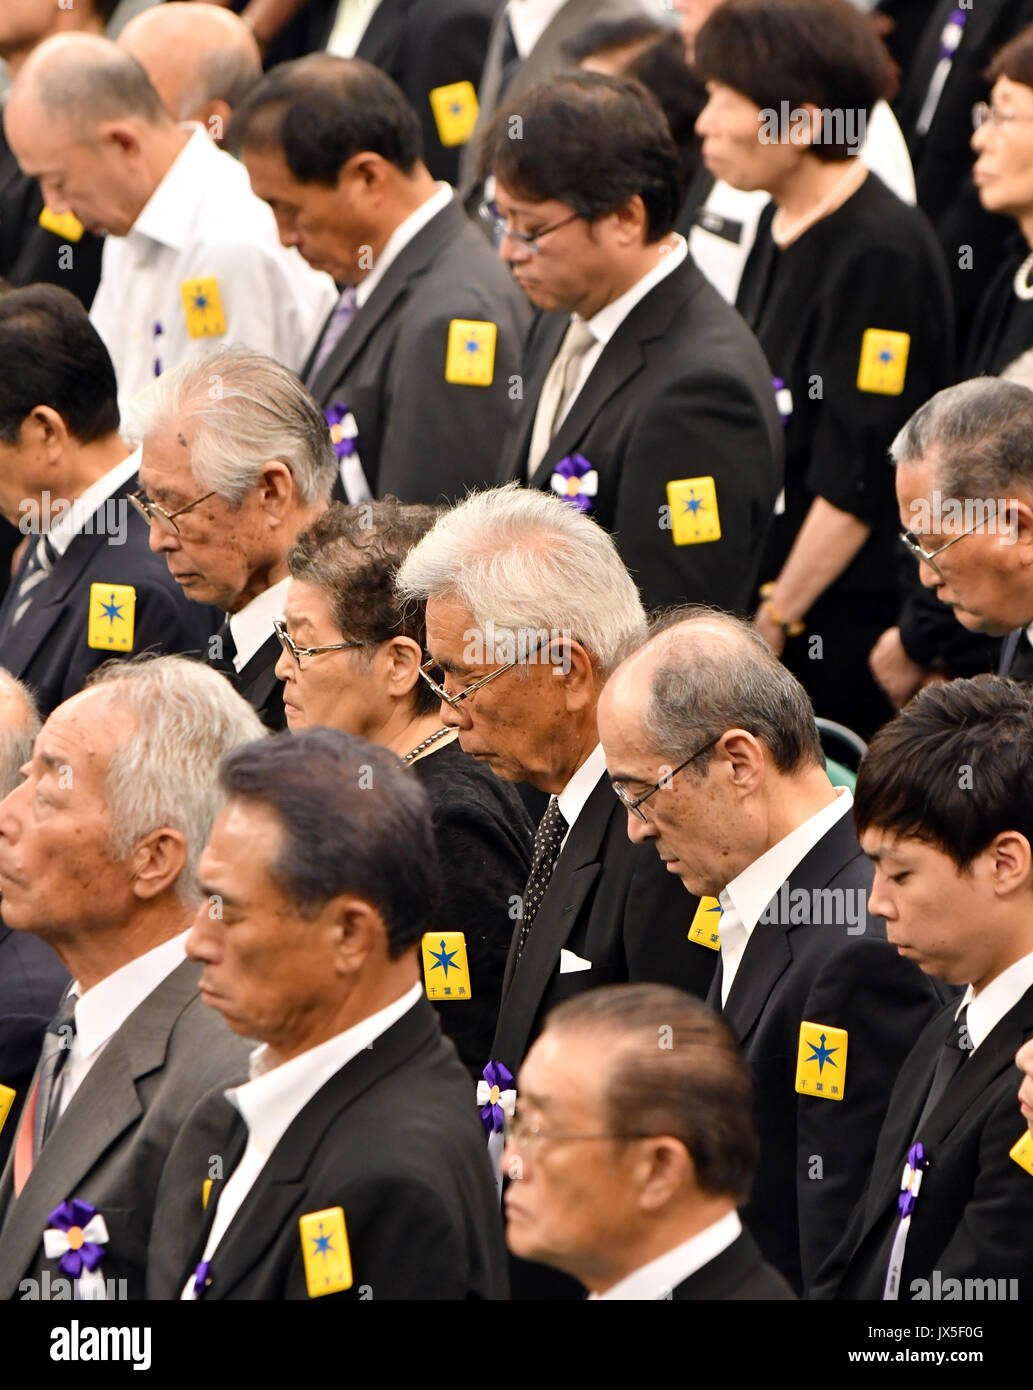 Tokyo, Japan. 15th Aug, 2017. A government-sponsored ceremony marking the 72nd anniversary of the end of World War II is held at Tokyos Nippon Budokan martial arts hall on Tuesday, August 15, 2017, with the attendance of Emperor Akihito and Empress Michiko. Credit: Natsuki Sakai/AFLO/Alamy Live News Stock Photo